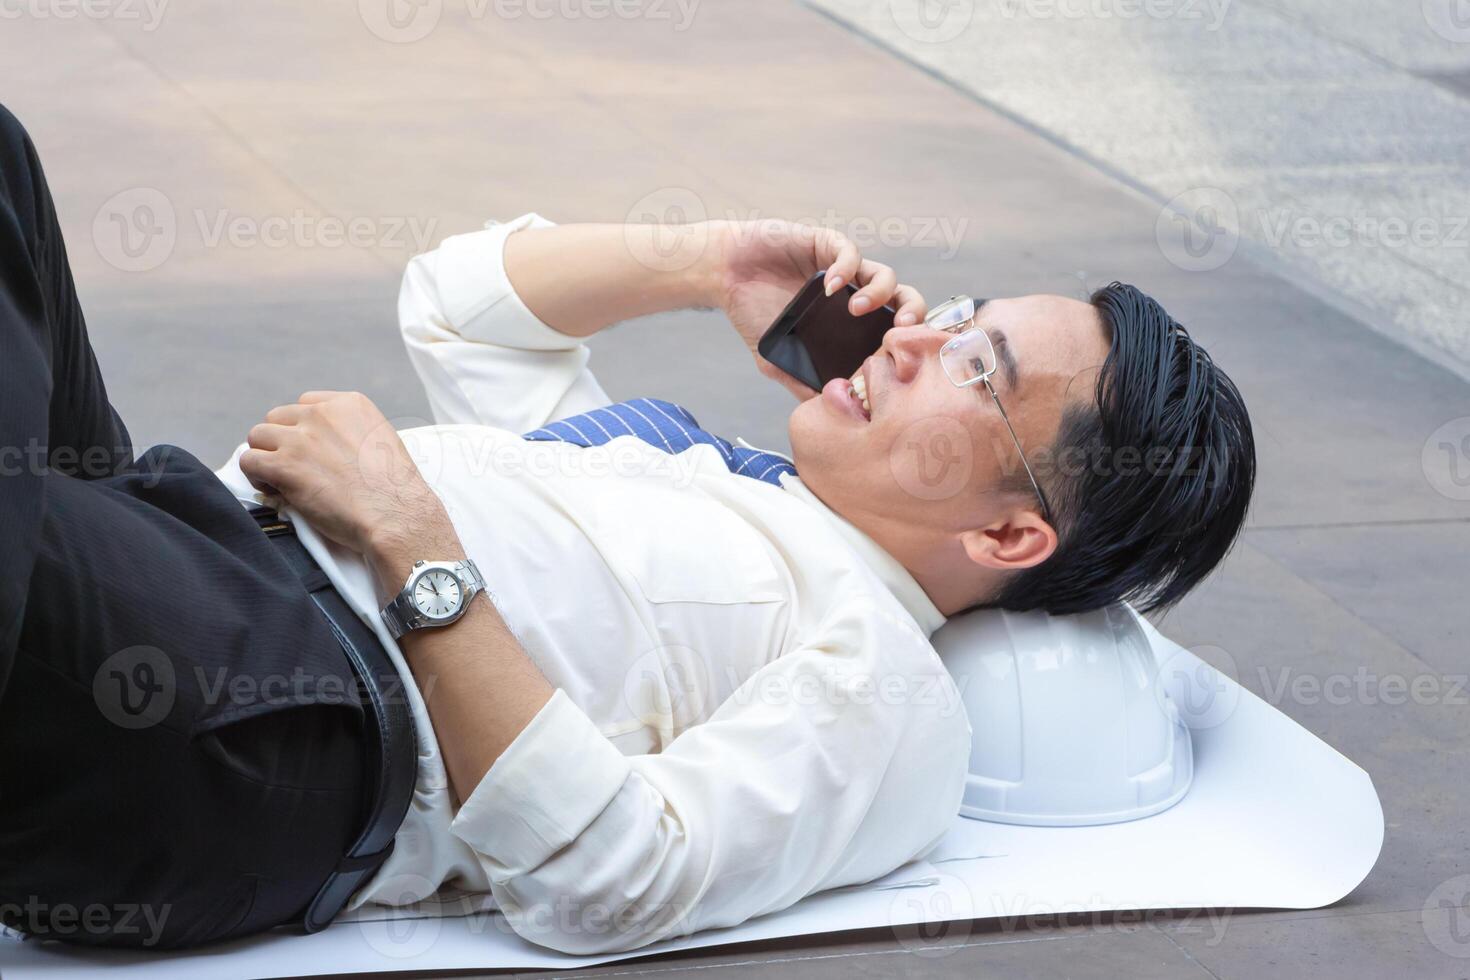 Engineer man relaxing and using smartphone on the floor after working hard photo